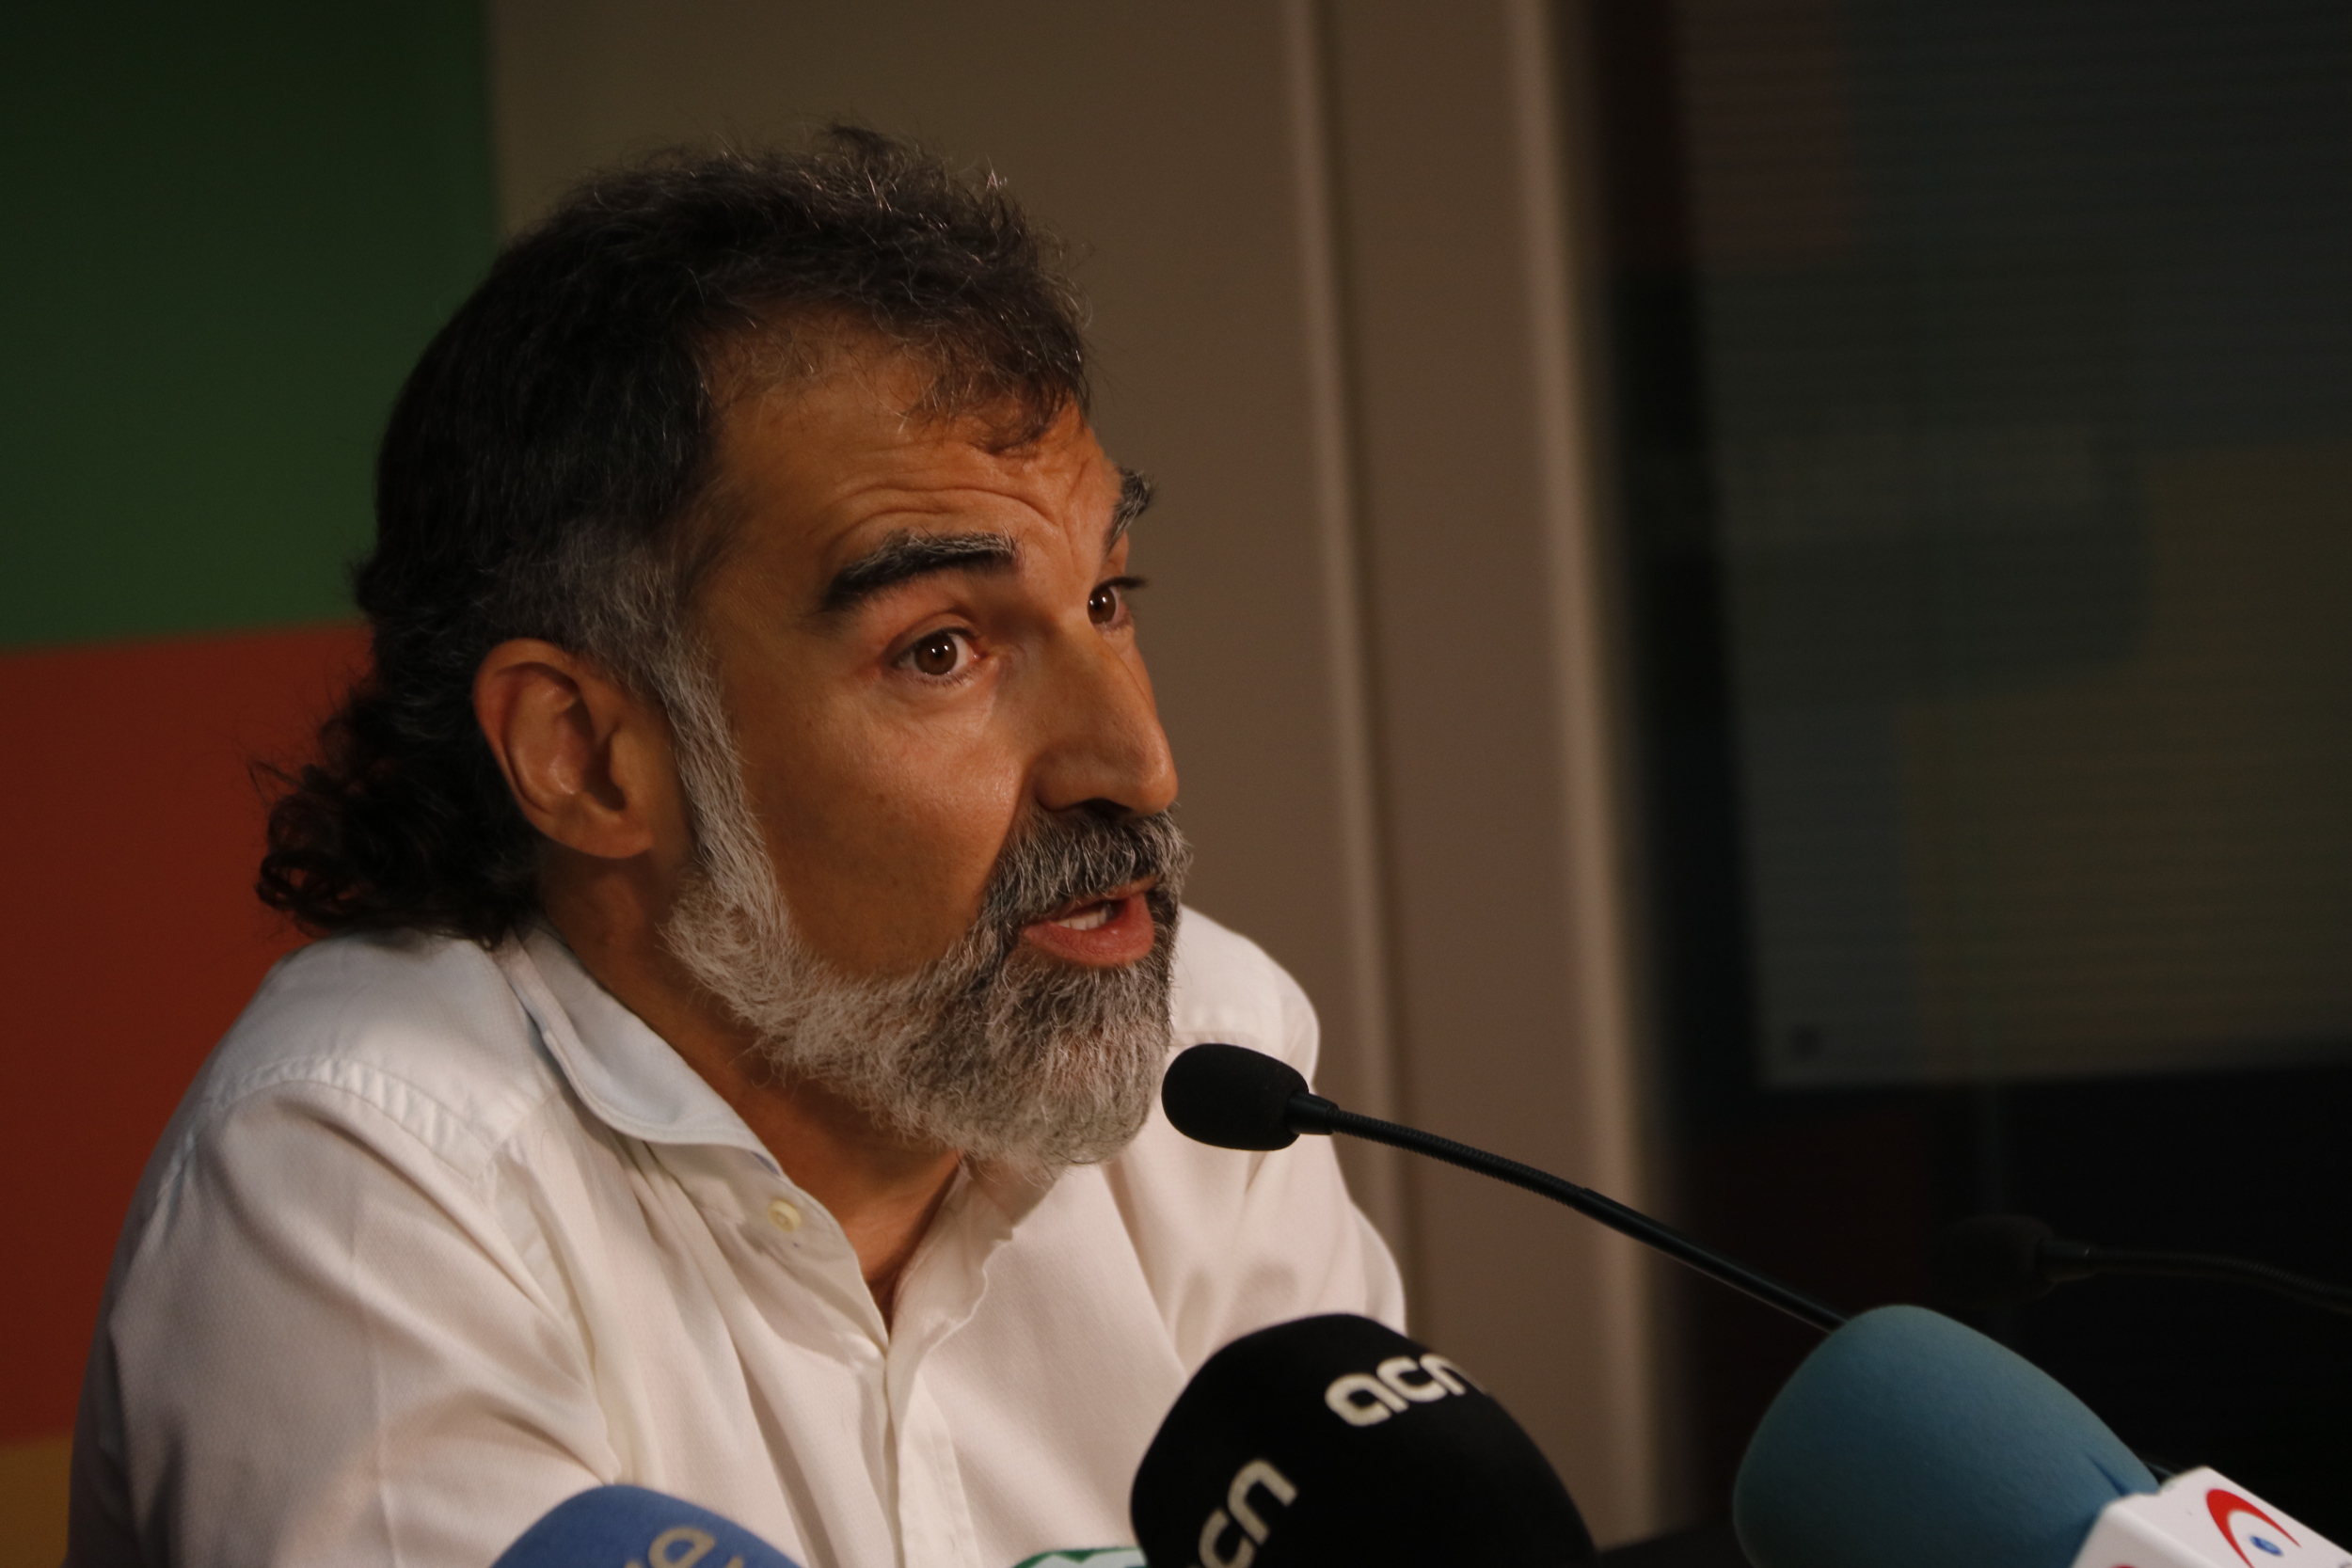 Grassroots civil society leader Jordi Cuixart at a press conference on August 31 2017 (by Guillem Roset)